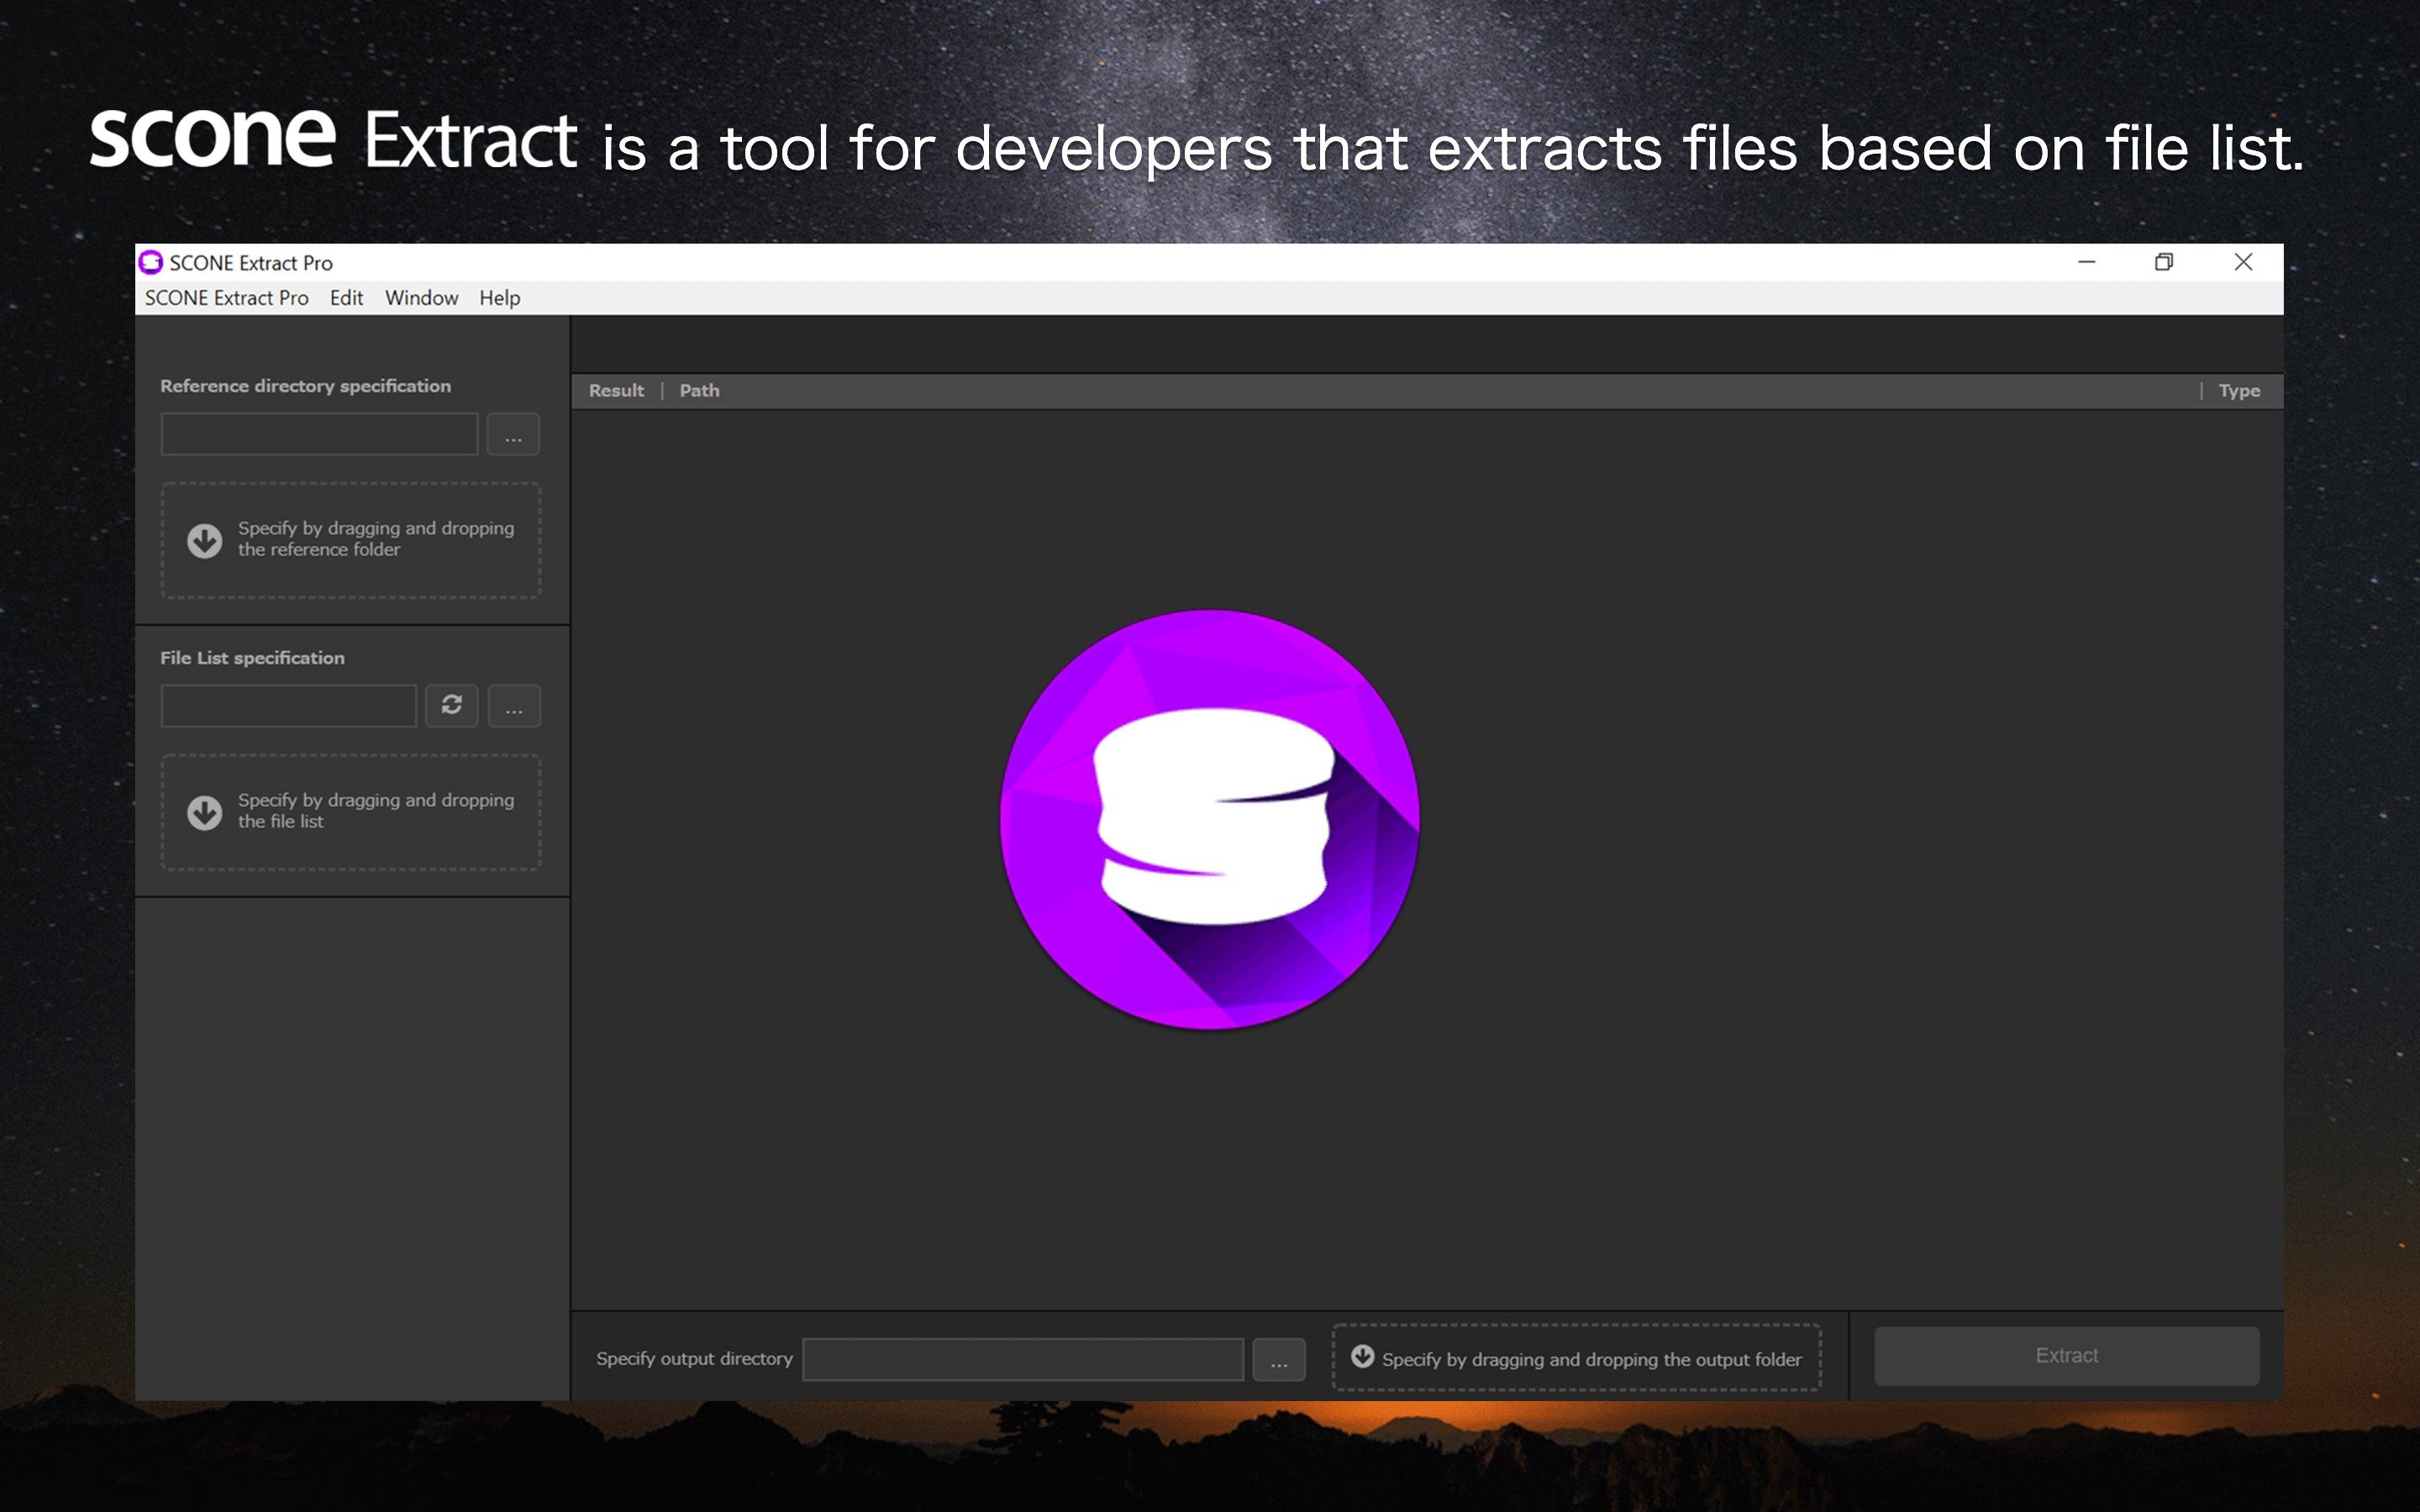 SCONE Extract is a tool for developers that extracts files based on file list.